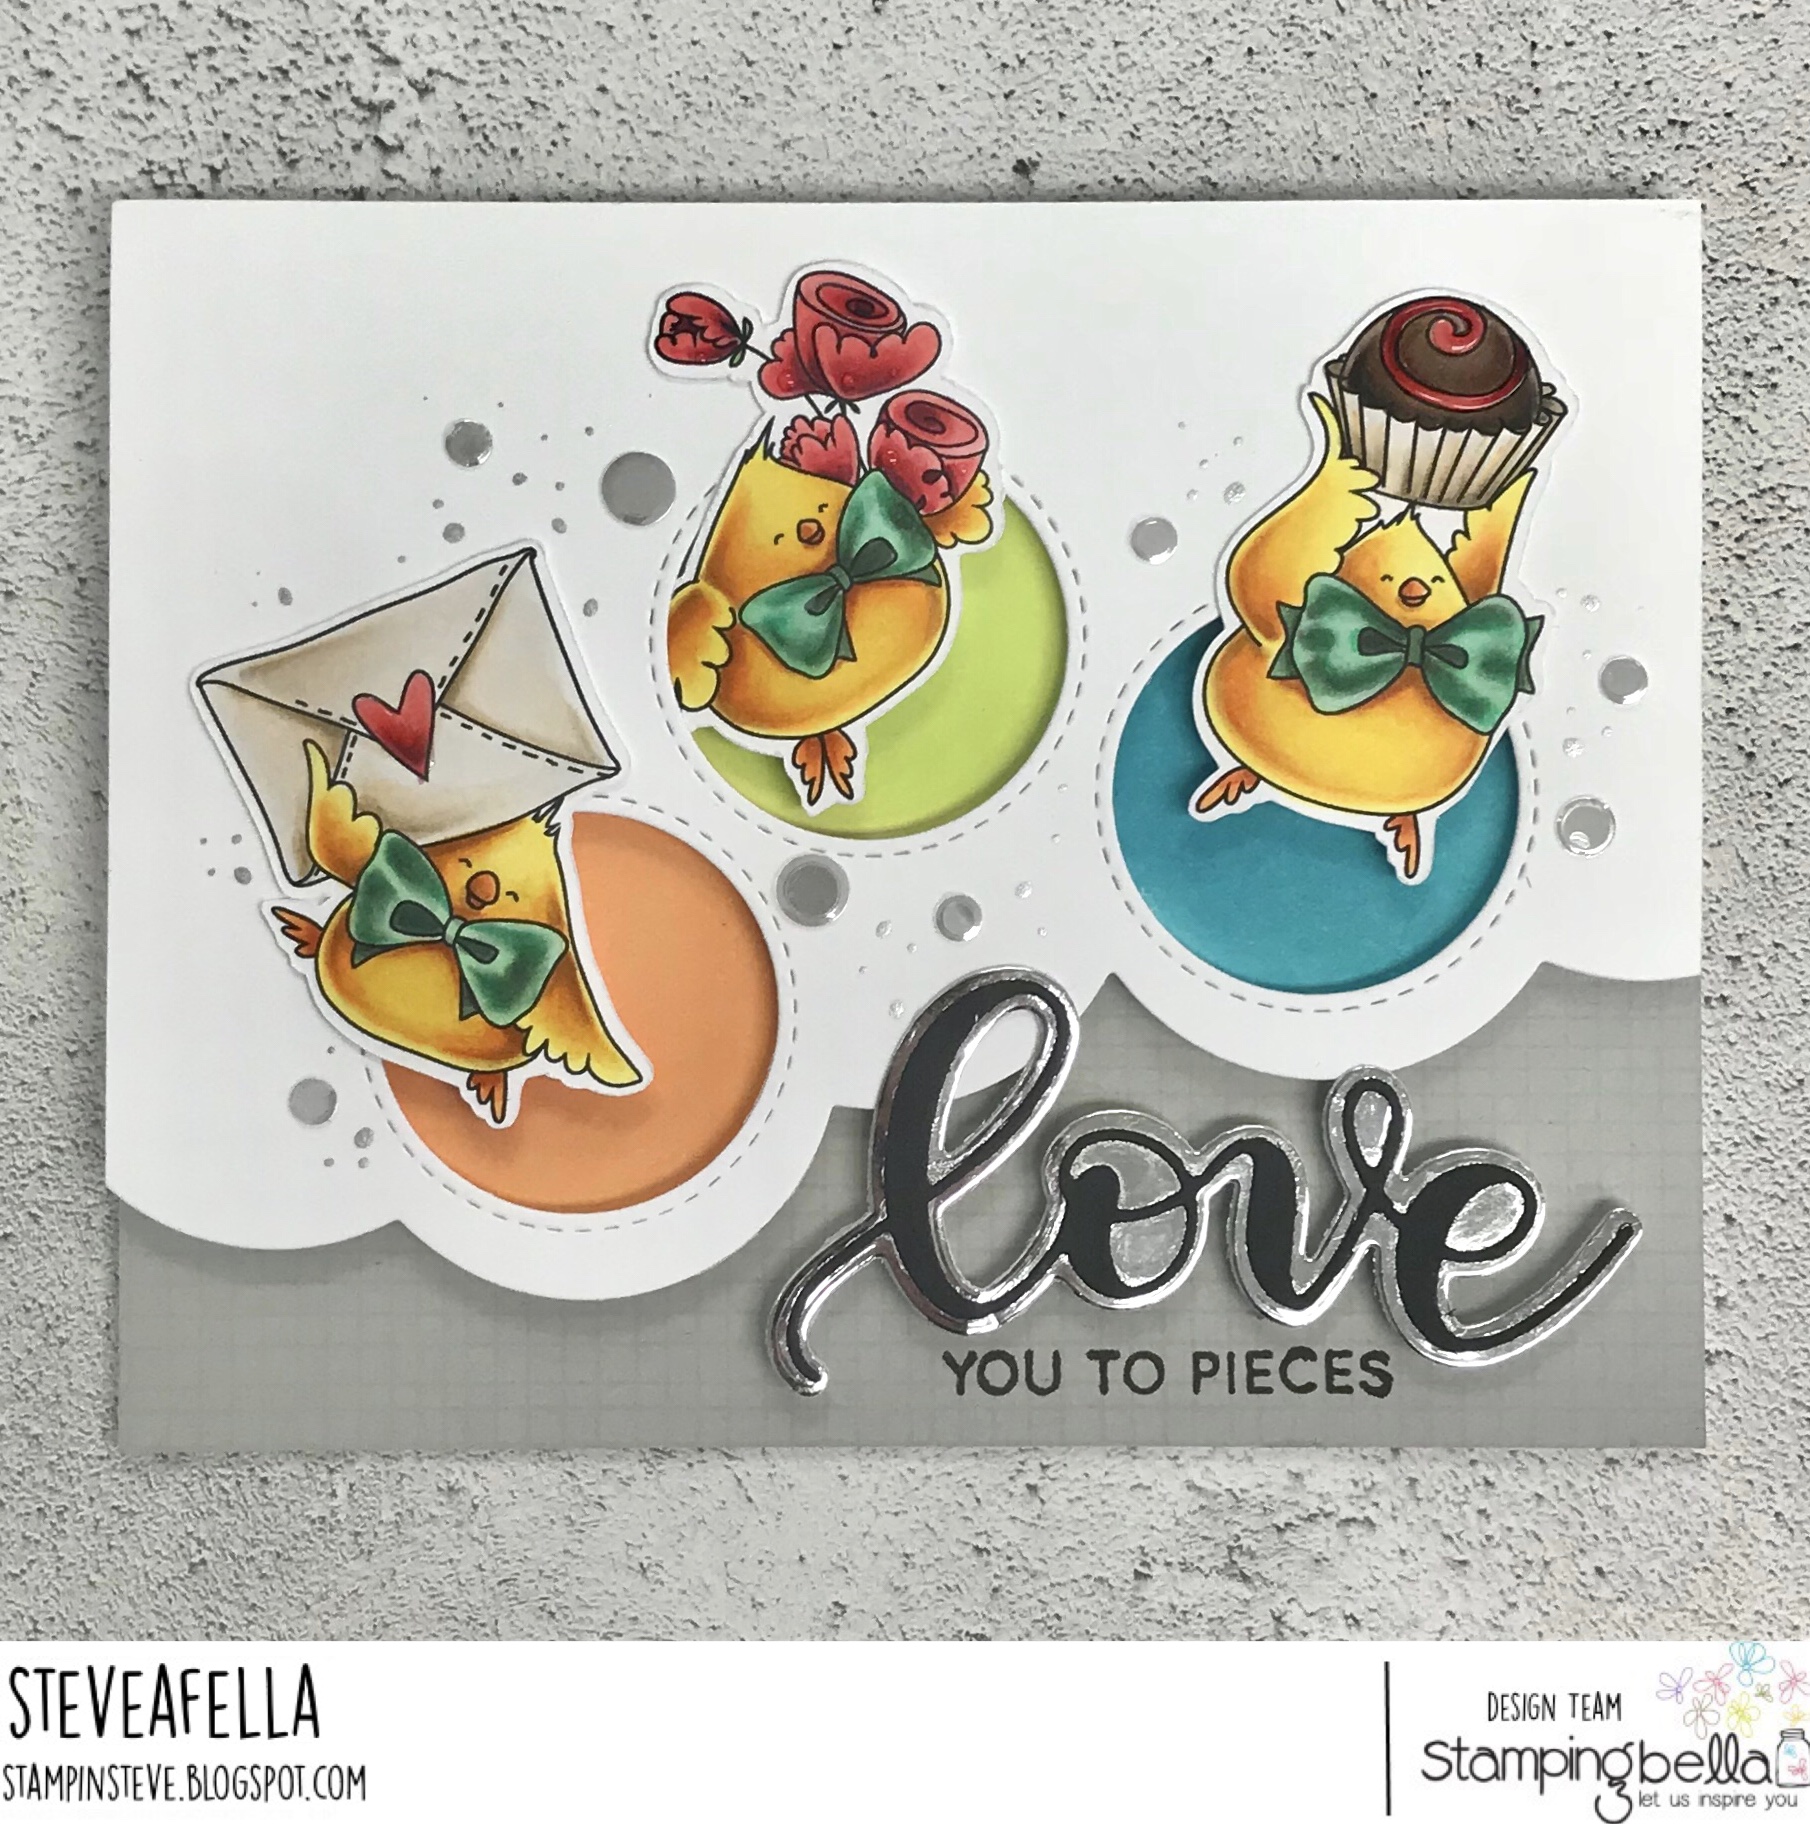 www.stampingbella.com: RUBBER STAMP USED : VALENTINE CHICKS, card made by STEPHEN KROPF